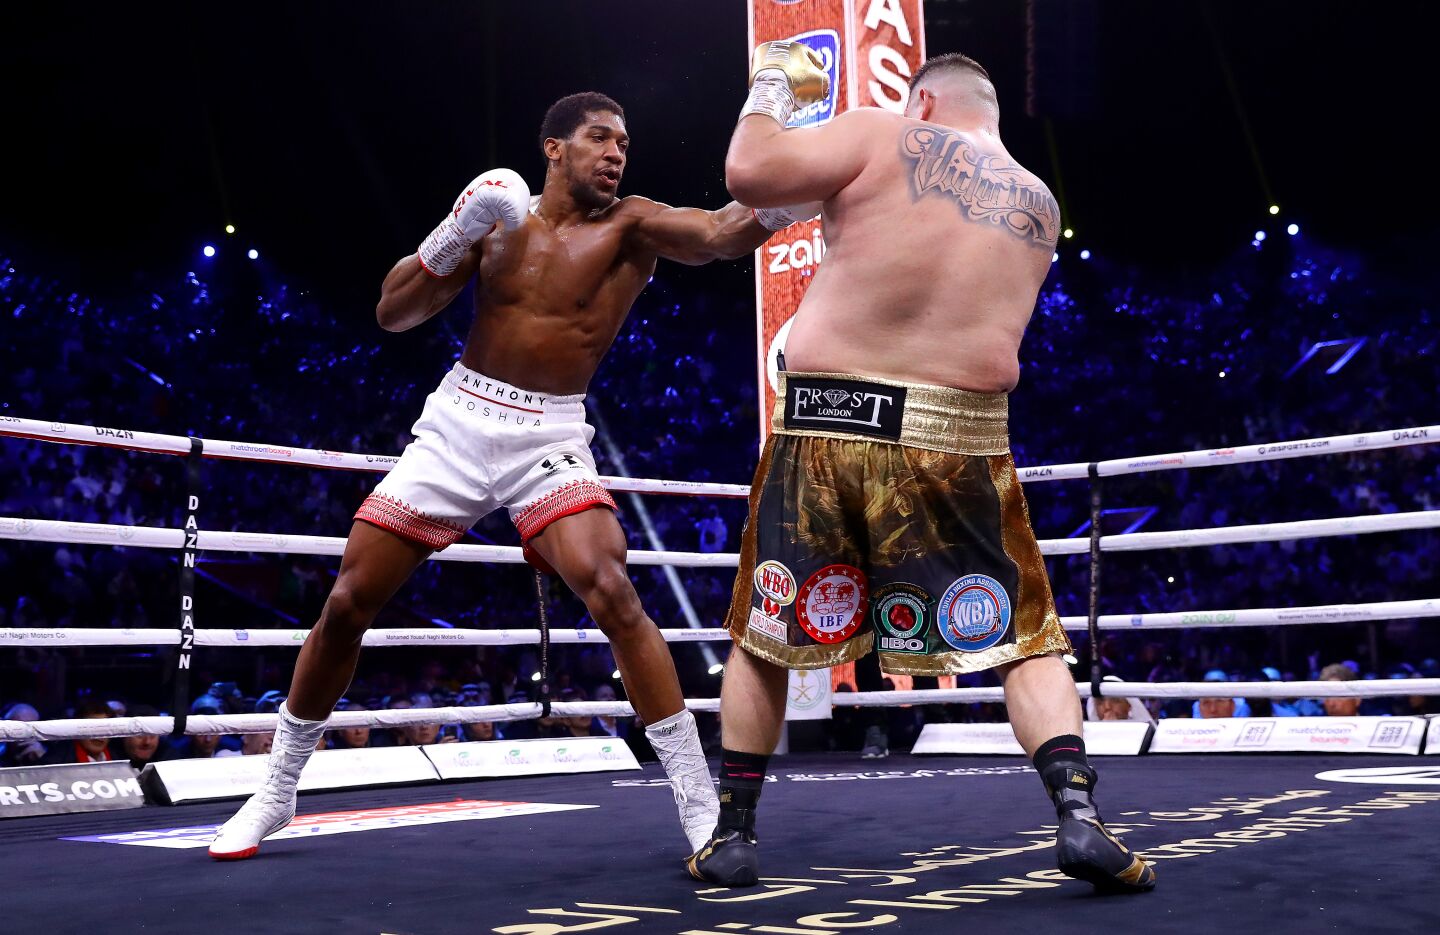 Anthony Joshua hits Andy Ruiz Jr. with a left during their heavyweight title fight on Dec. 7 in Diriyah, Saudi Arabia.